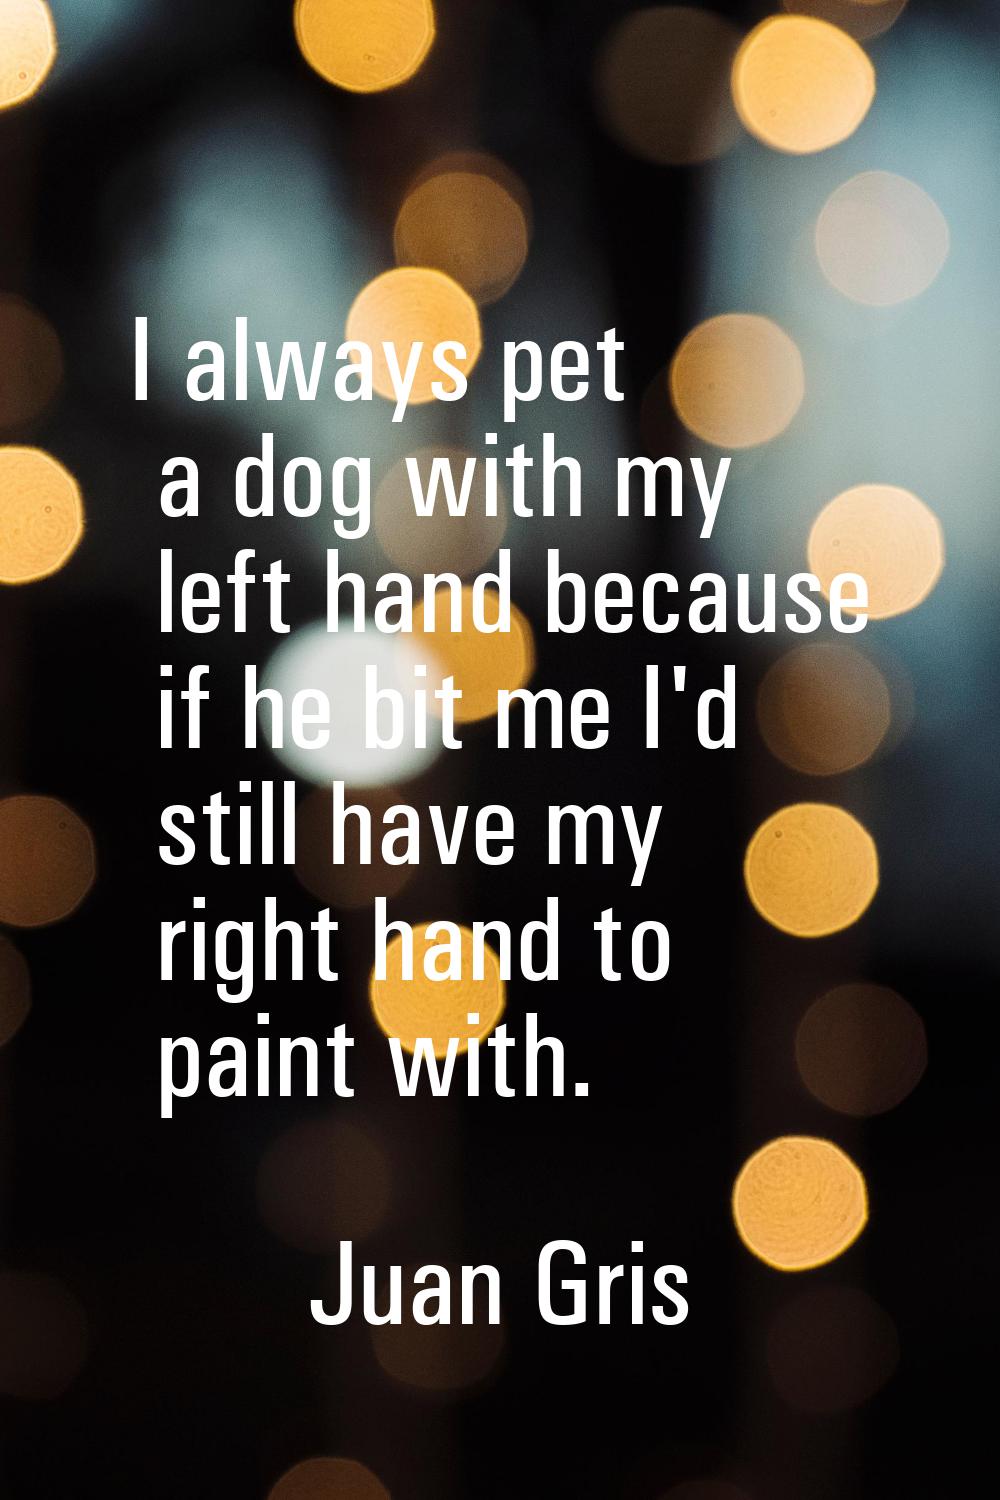 I always pet a dog with my left hand because if he bit me I'd still have my right hand to paint wit